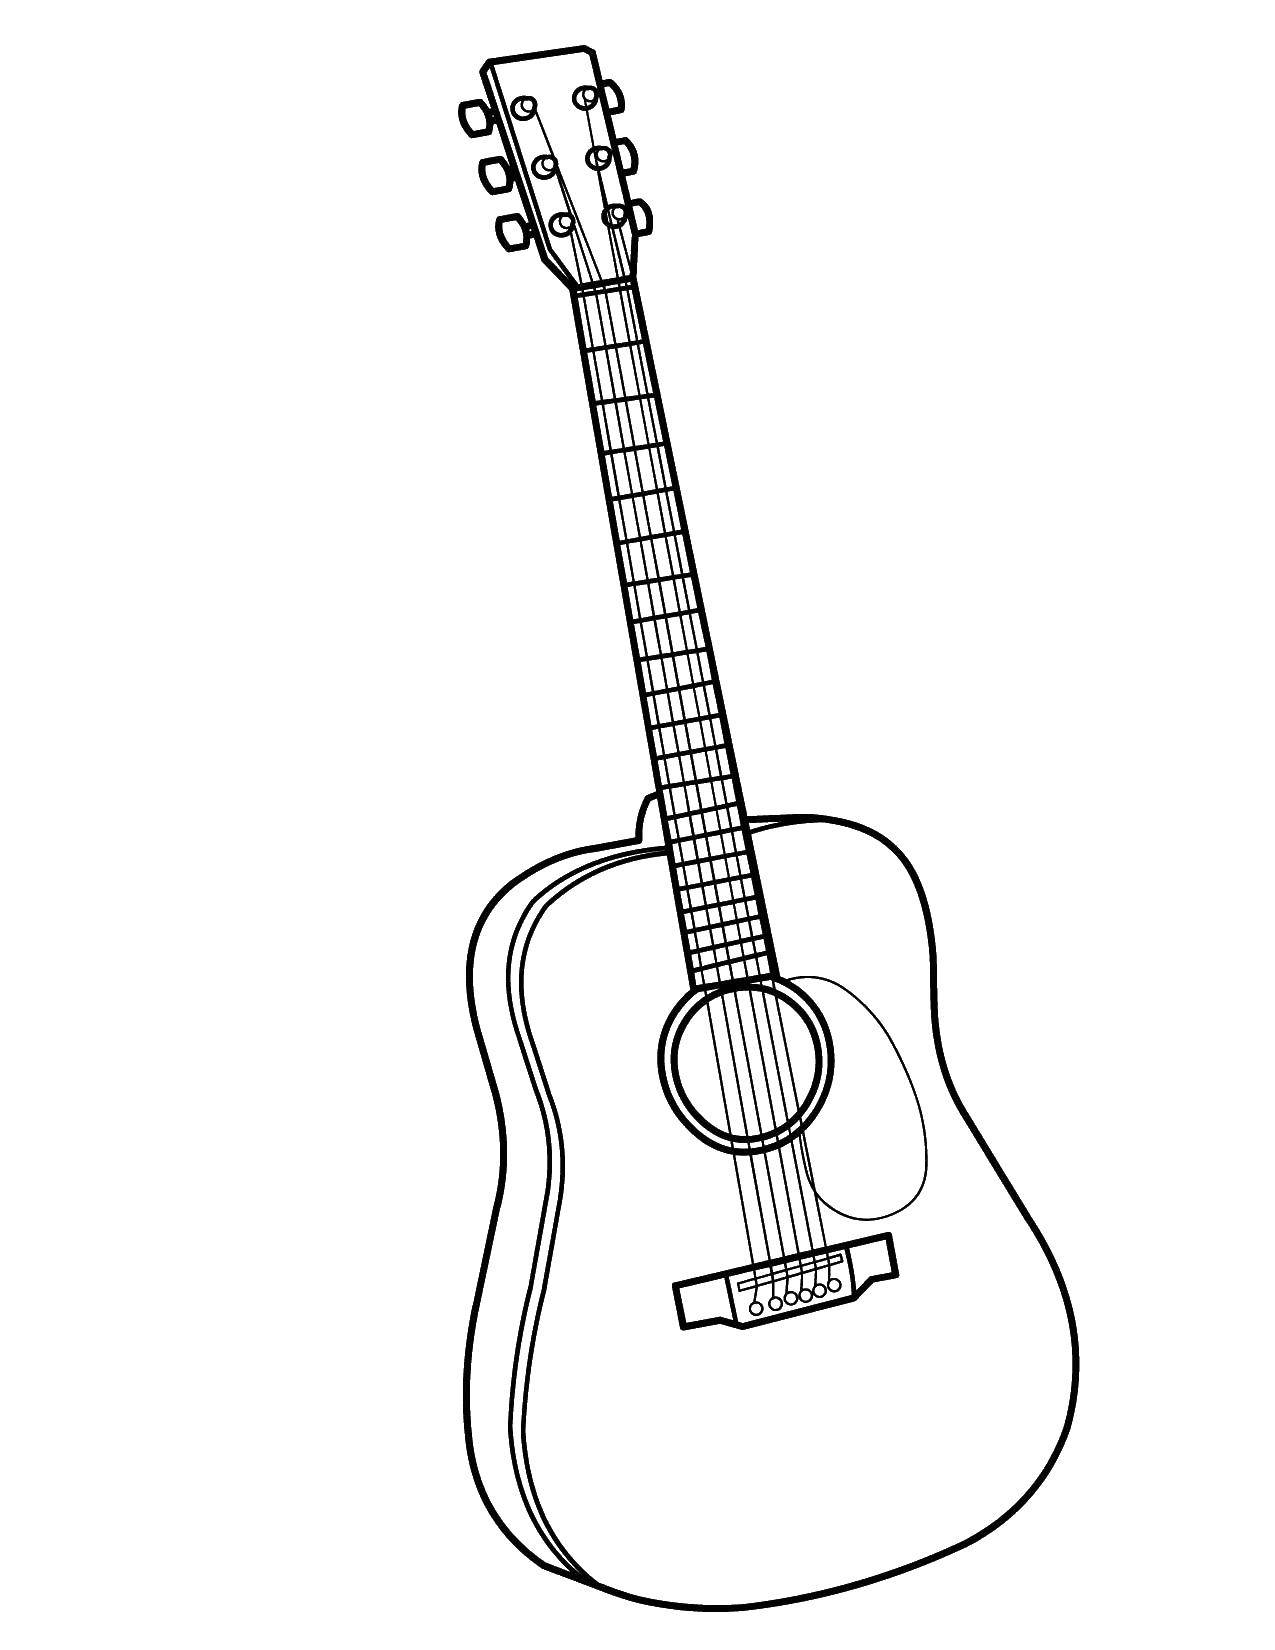 Coloring A simple guitar.. Category Musical instrument. Tags:  Music, instrument, musician, note.